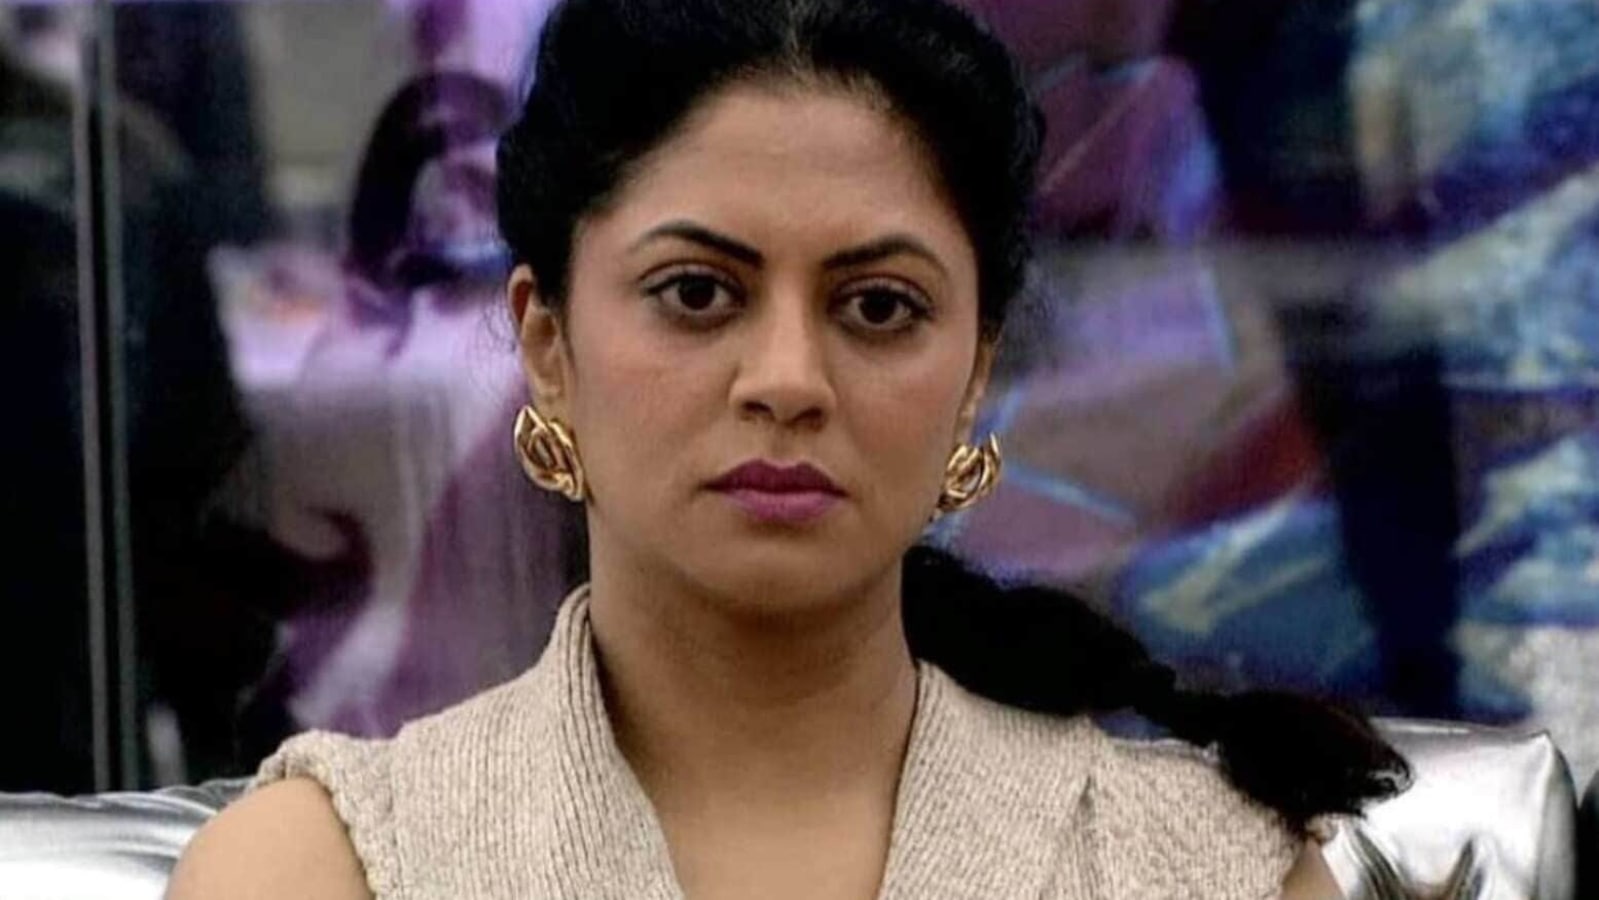 Kavita Kaushik says she ‘pukes’ when she thinks about her time in Bigg Boss: ‘I had a really bad experience’